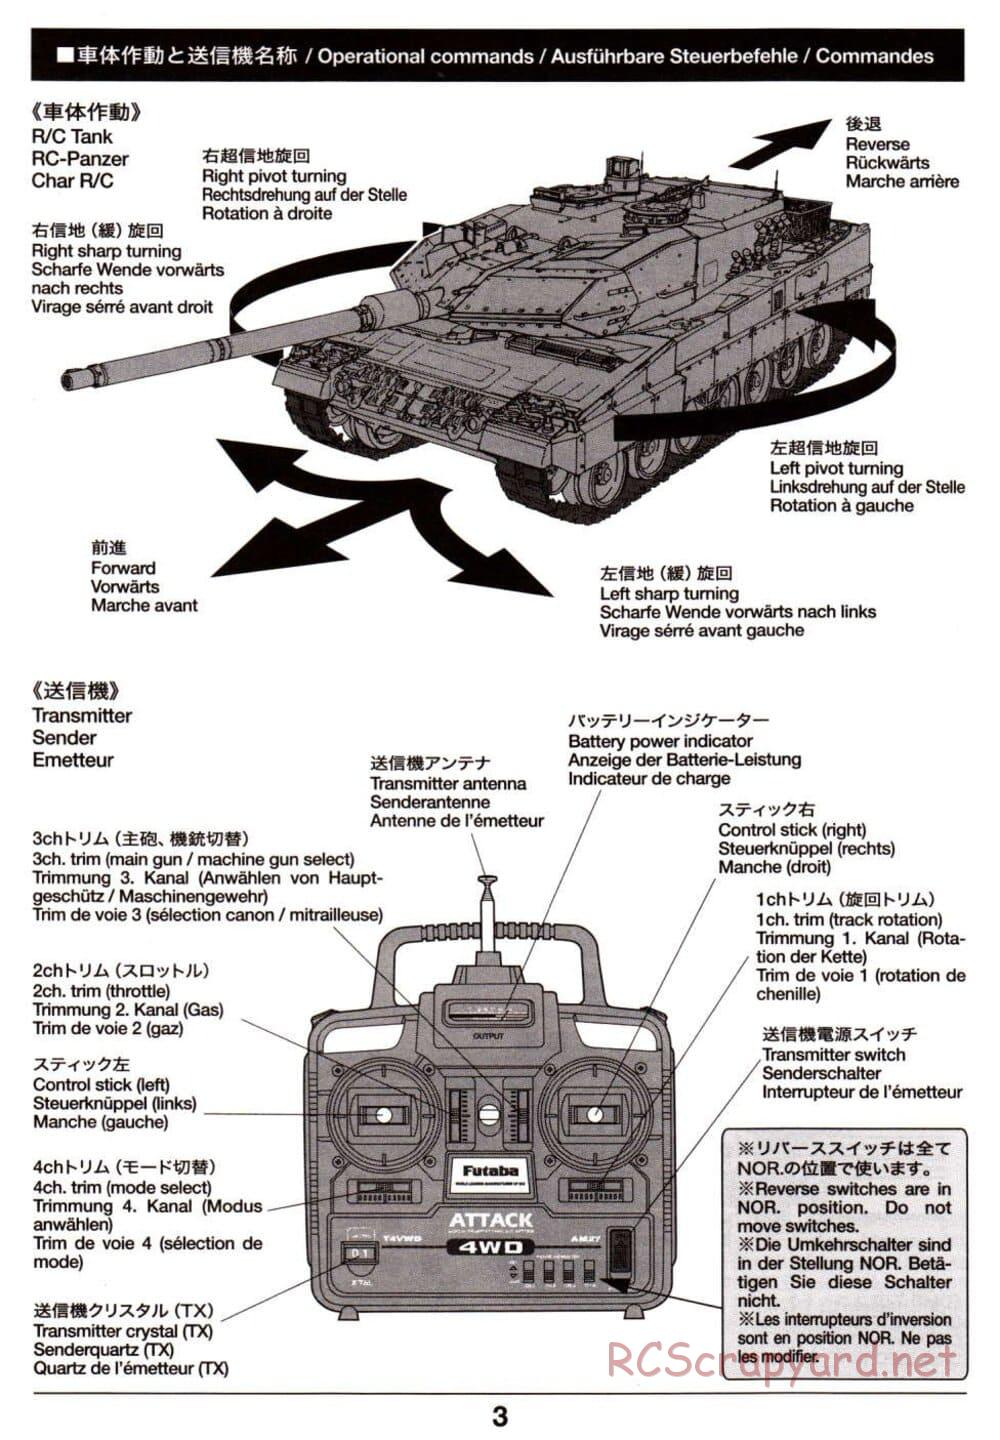 Tamiya - Leopard 2 A6 - 1/16 Scale Chassis - Operation Manual - Page 3